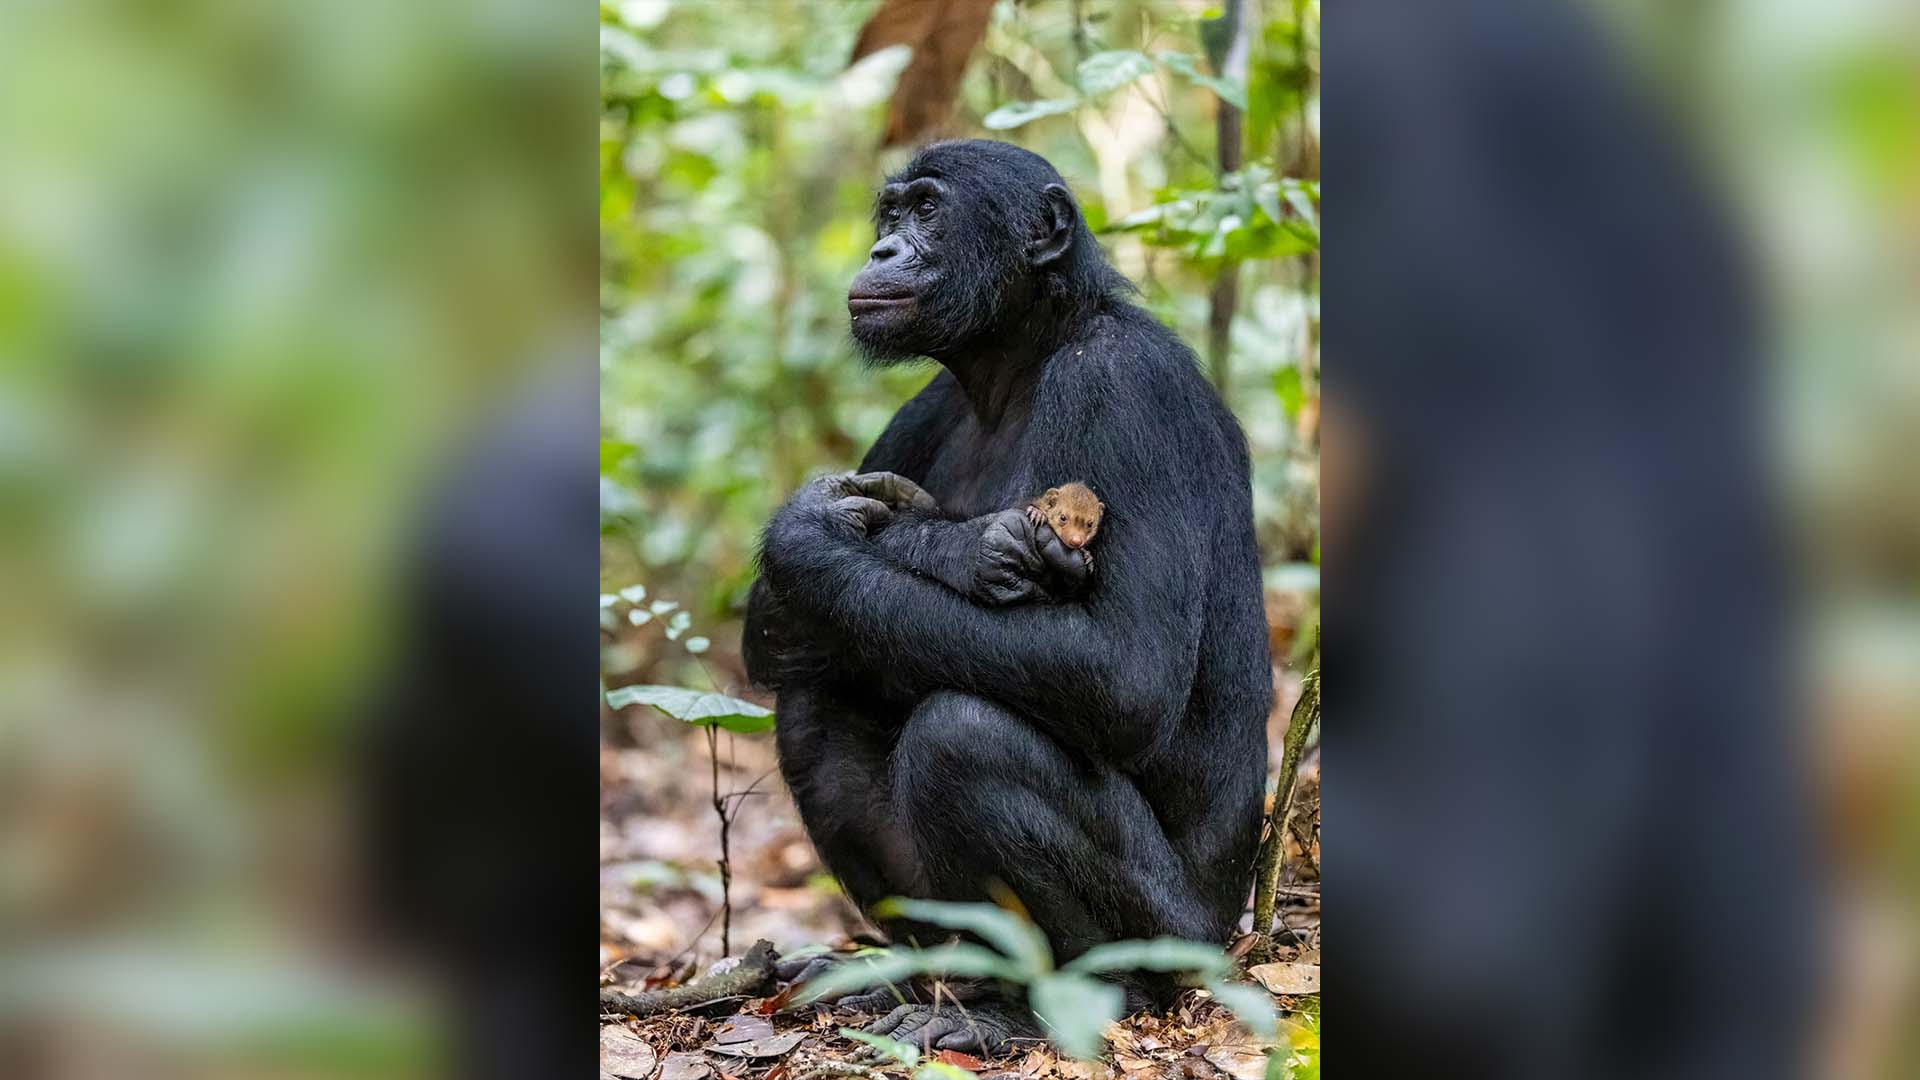 Nature Photography Awards The Bonobo and His Pet